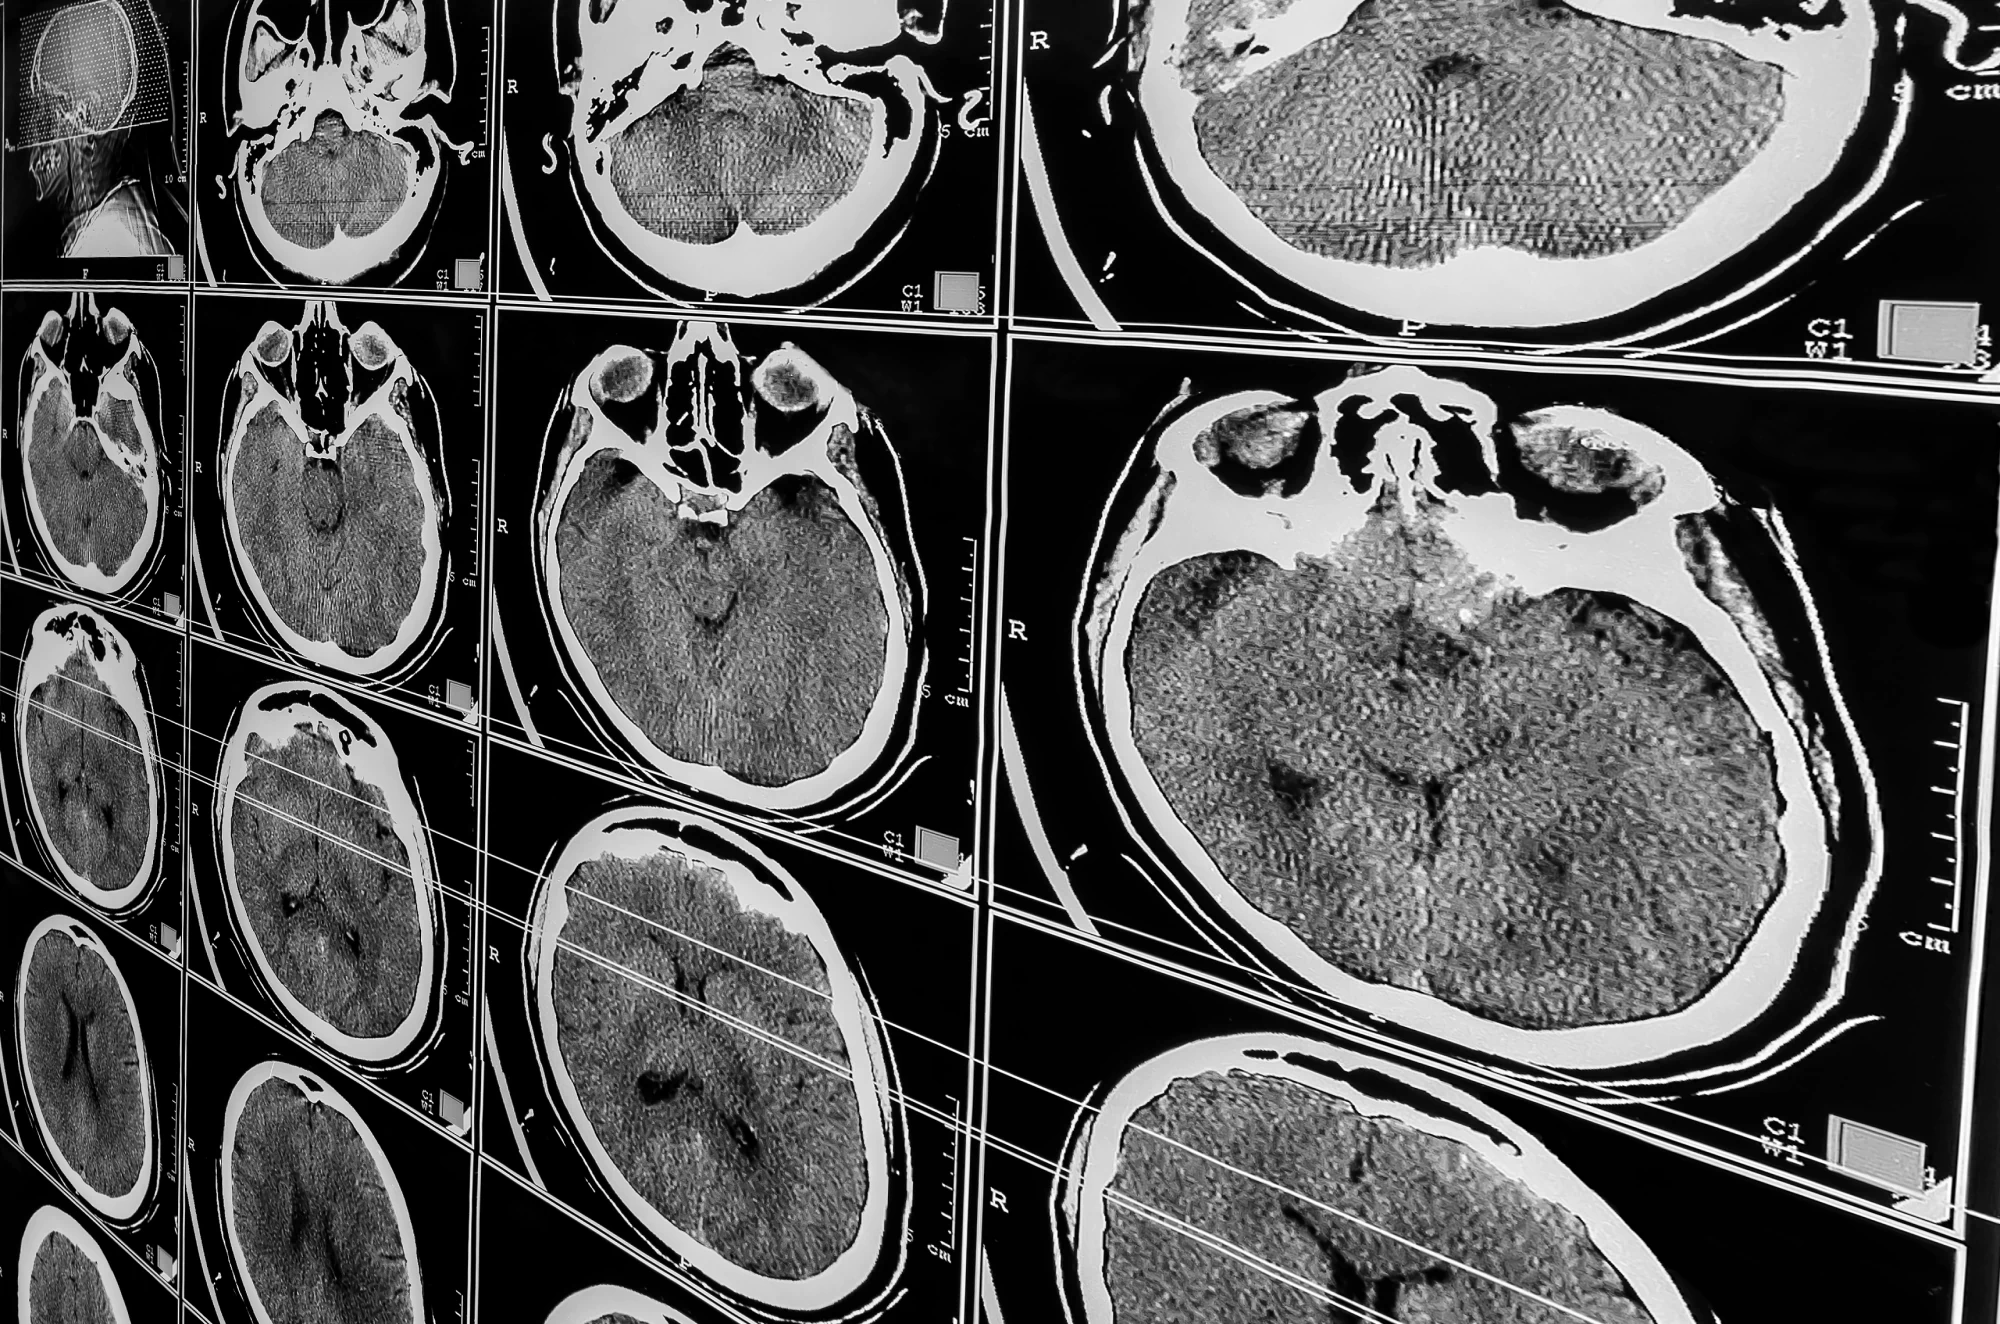 A number of medical scans of a person's brain in black and white.